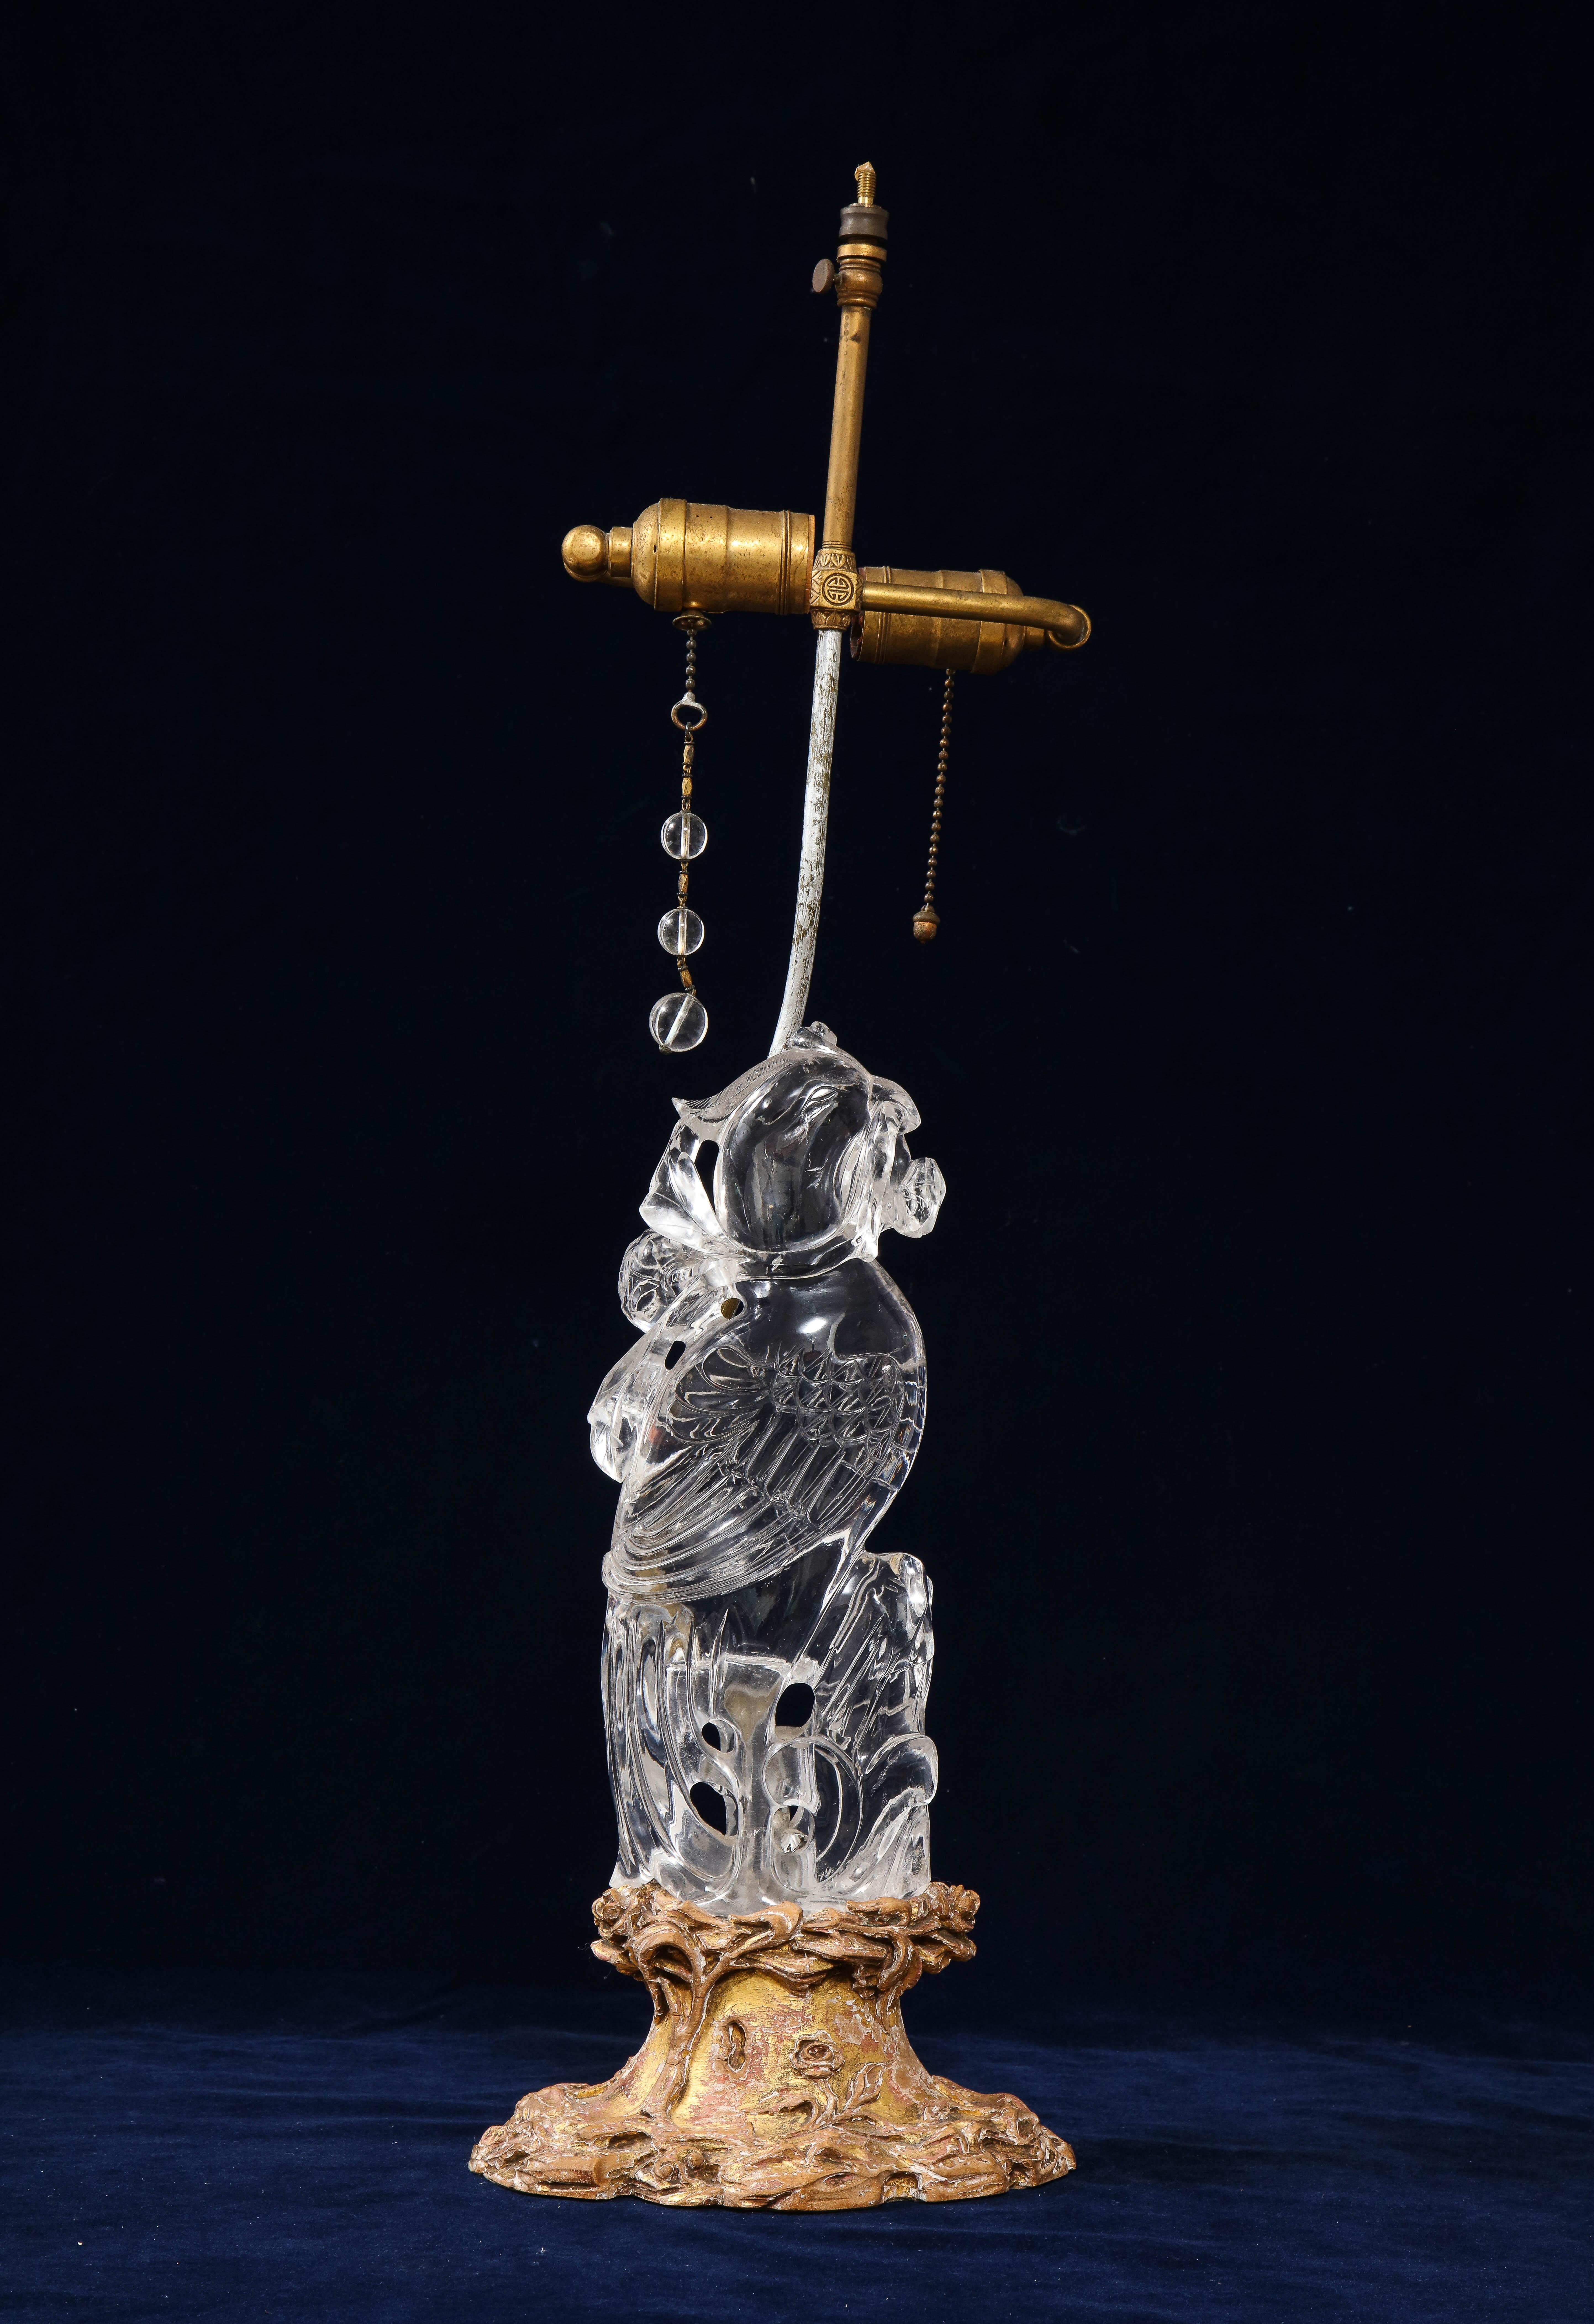 An extremely fine quality and quite large, 19th century Chinese Gilt Bronze Mounted hand-carved rock crystal phoenix lamp, attributed to Edward Farmer. The phoenix is hand-carved from a very large and super clear piece of rock crystal. There is an